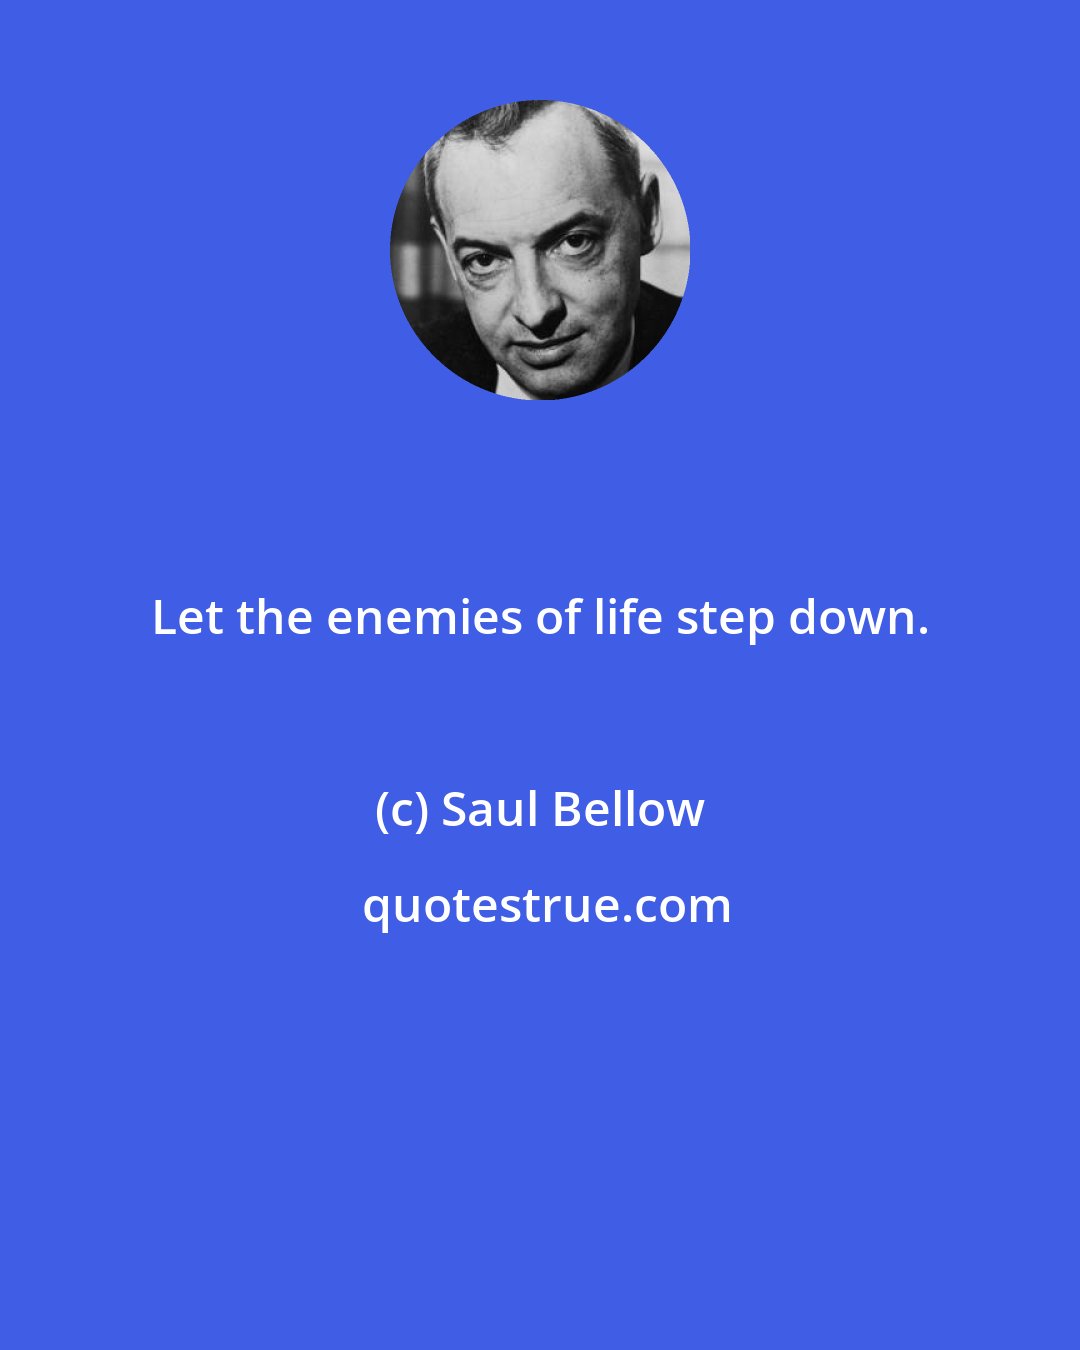 Saul Bellow: Let the enemies of life step down.